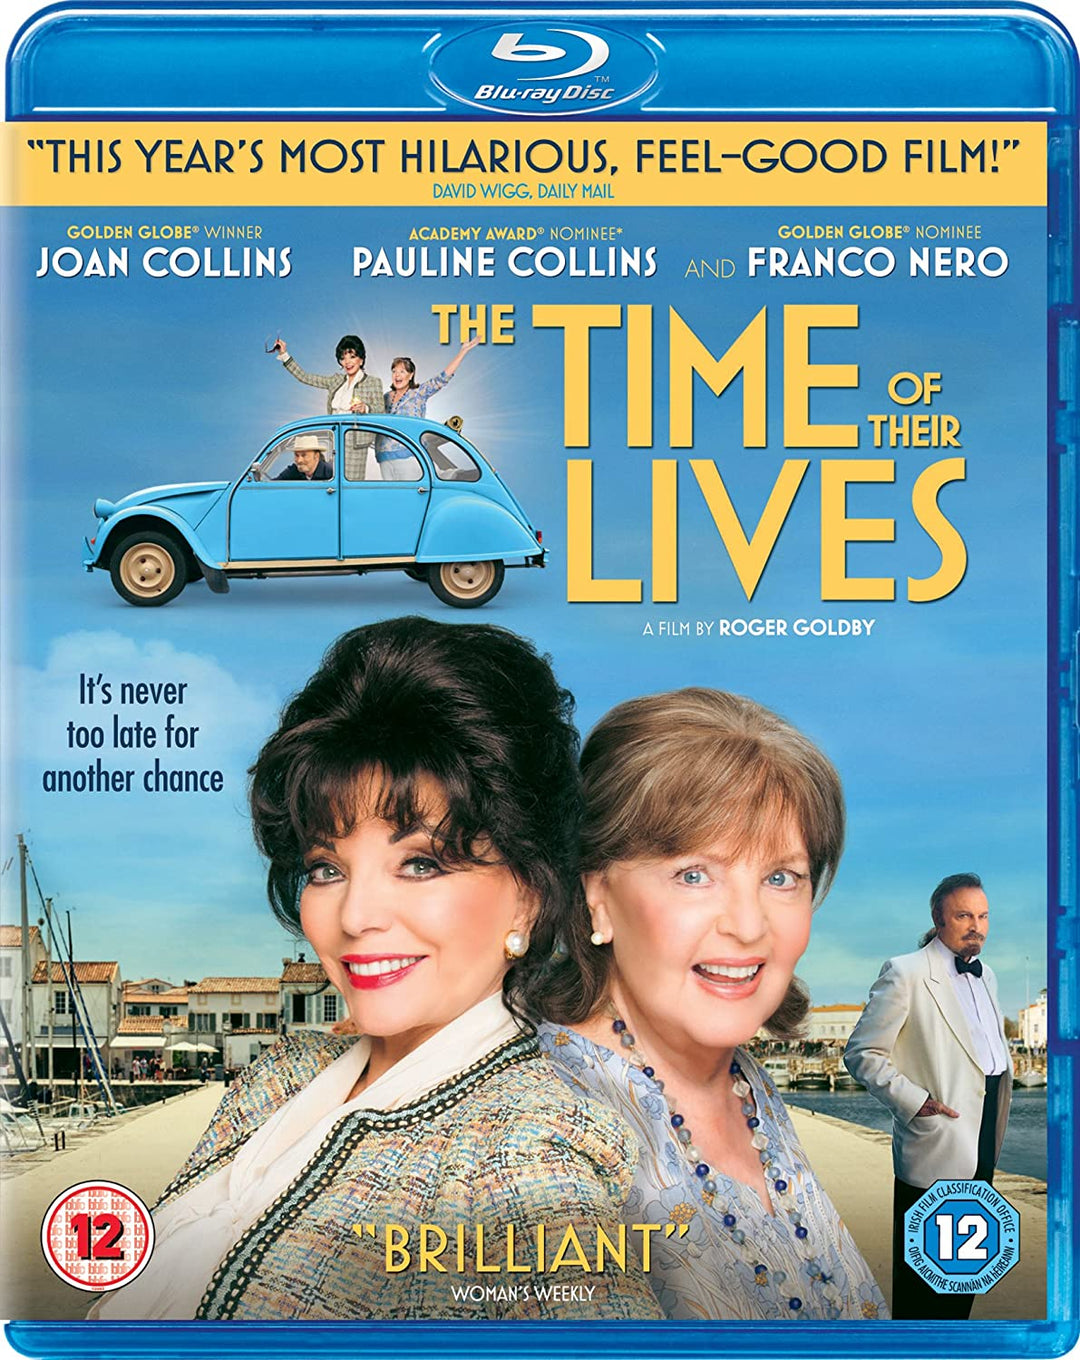 The Time of Their Lives (BD) [2017] - Comedy [Blu-Ray]